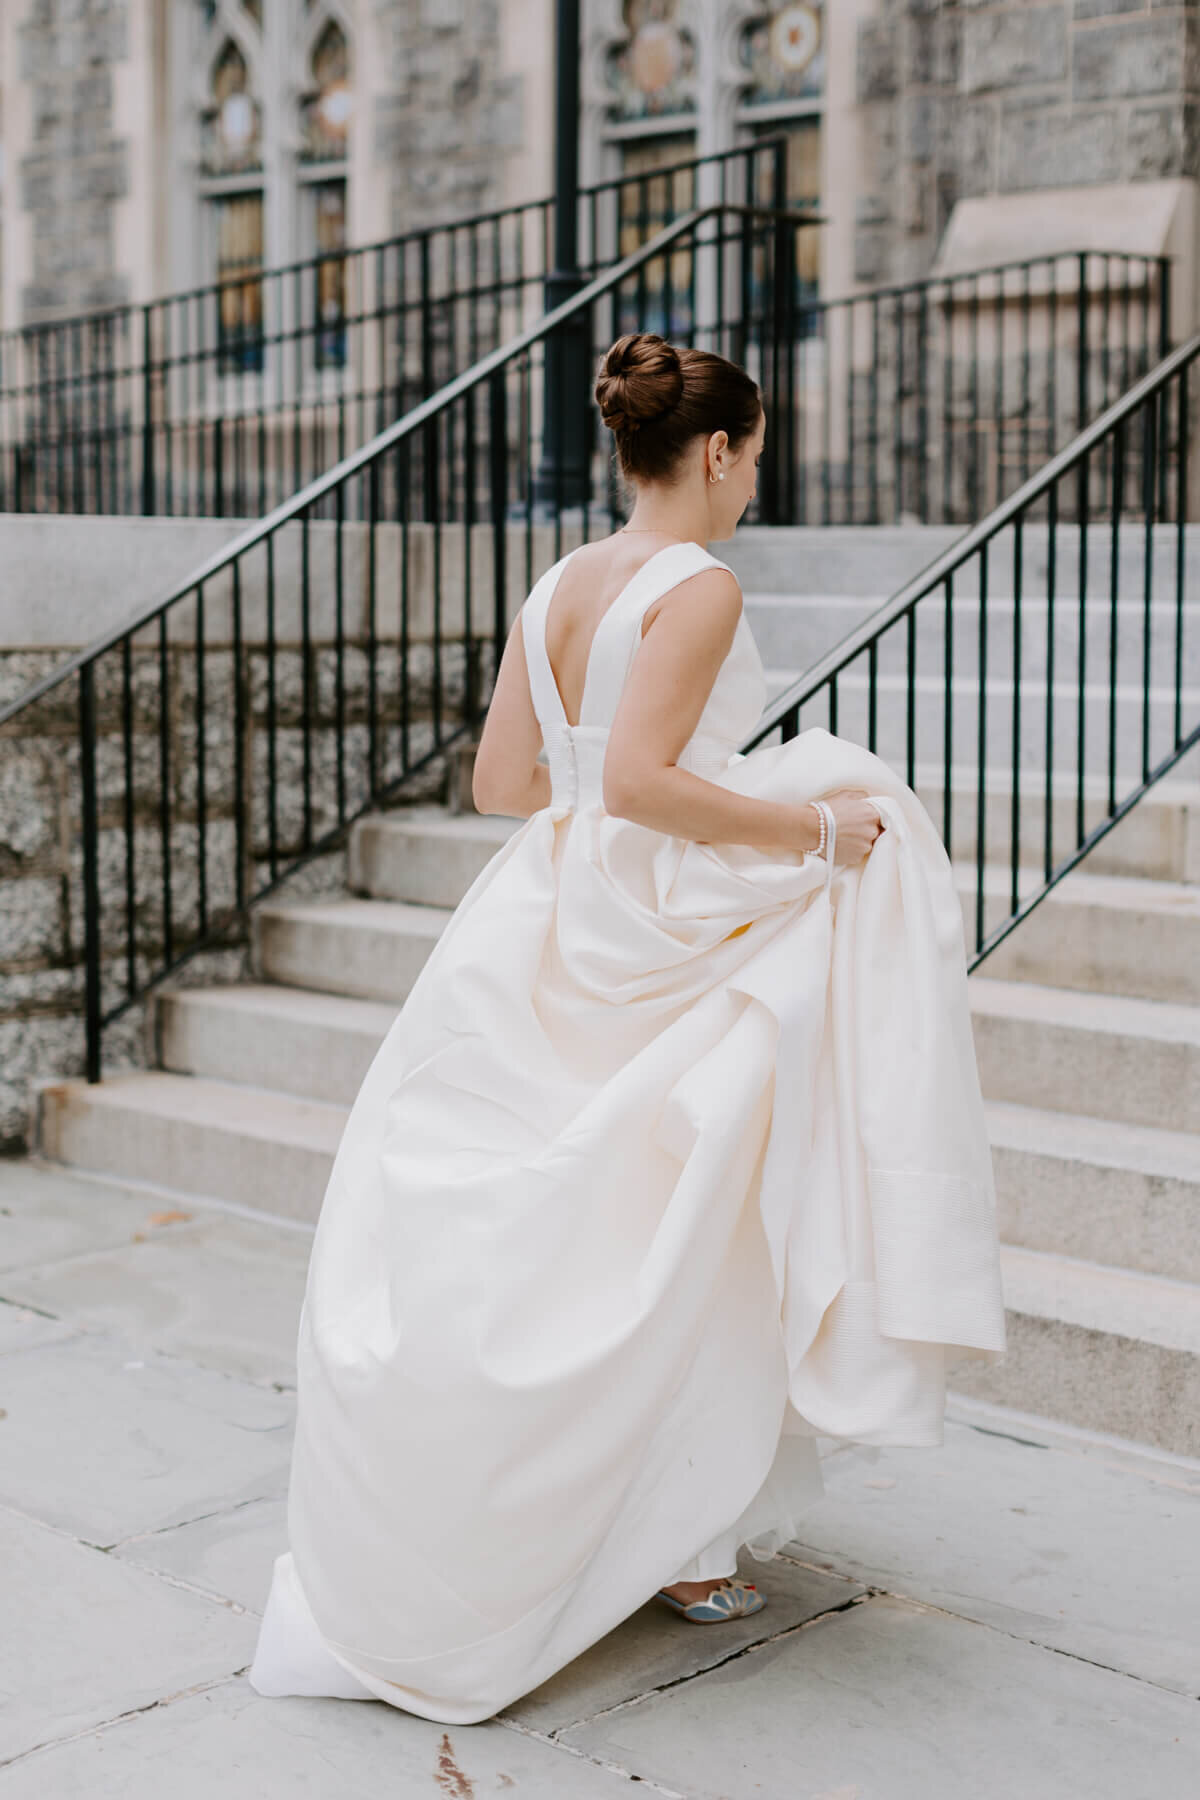 agriffin-events-dc-portrait-gallery-kogod-courtyard-fall-wedding-lauren-louise-12